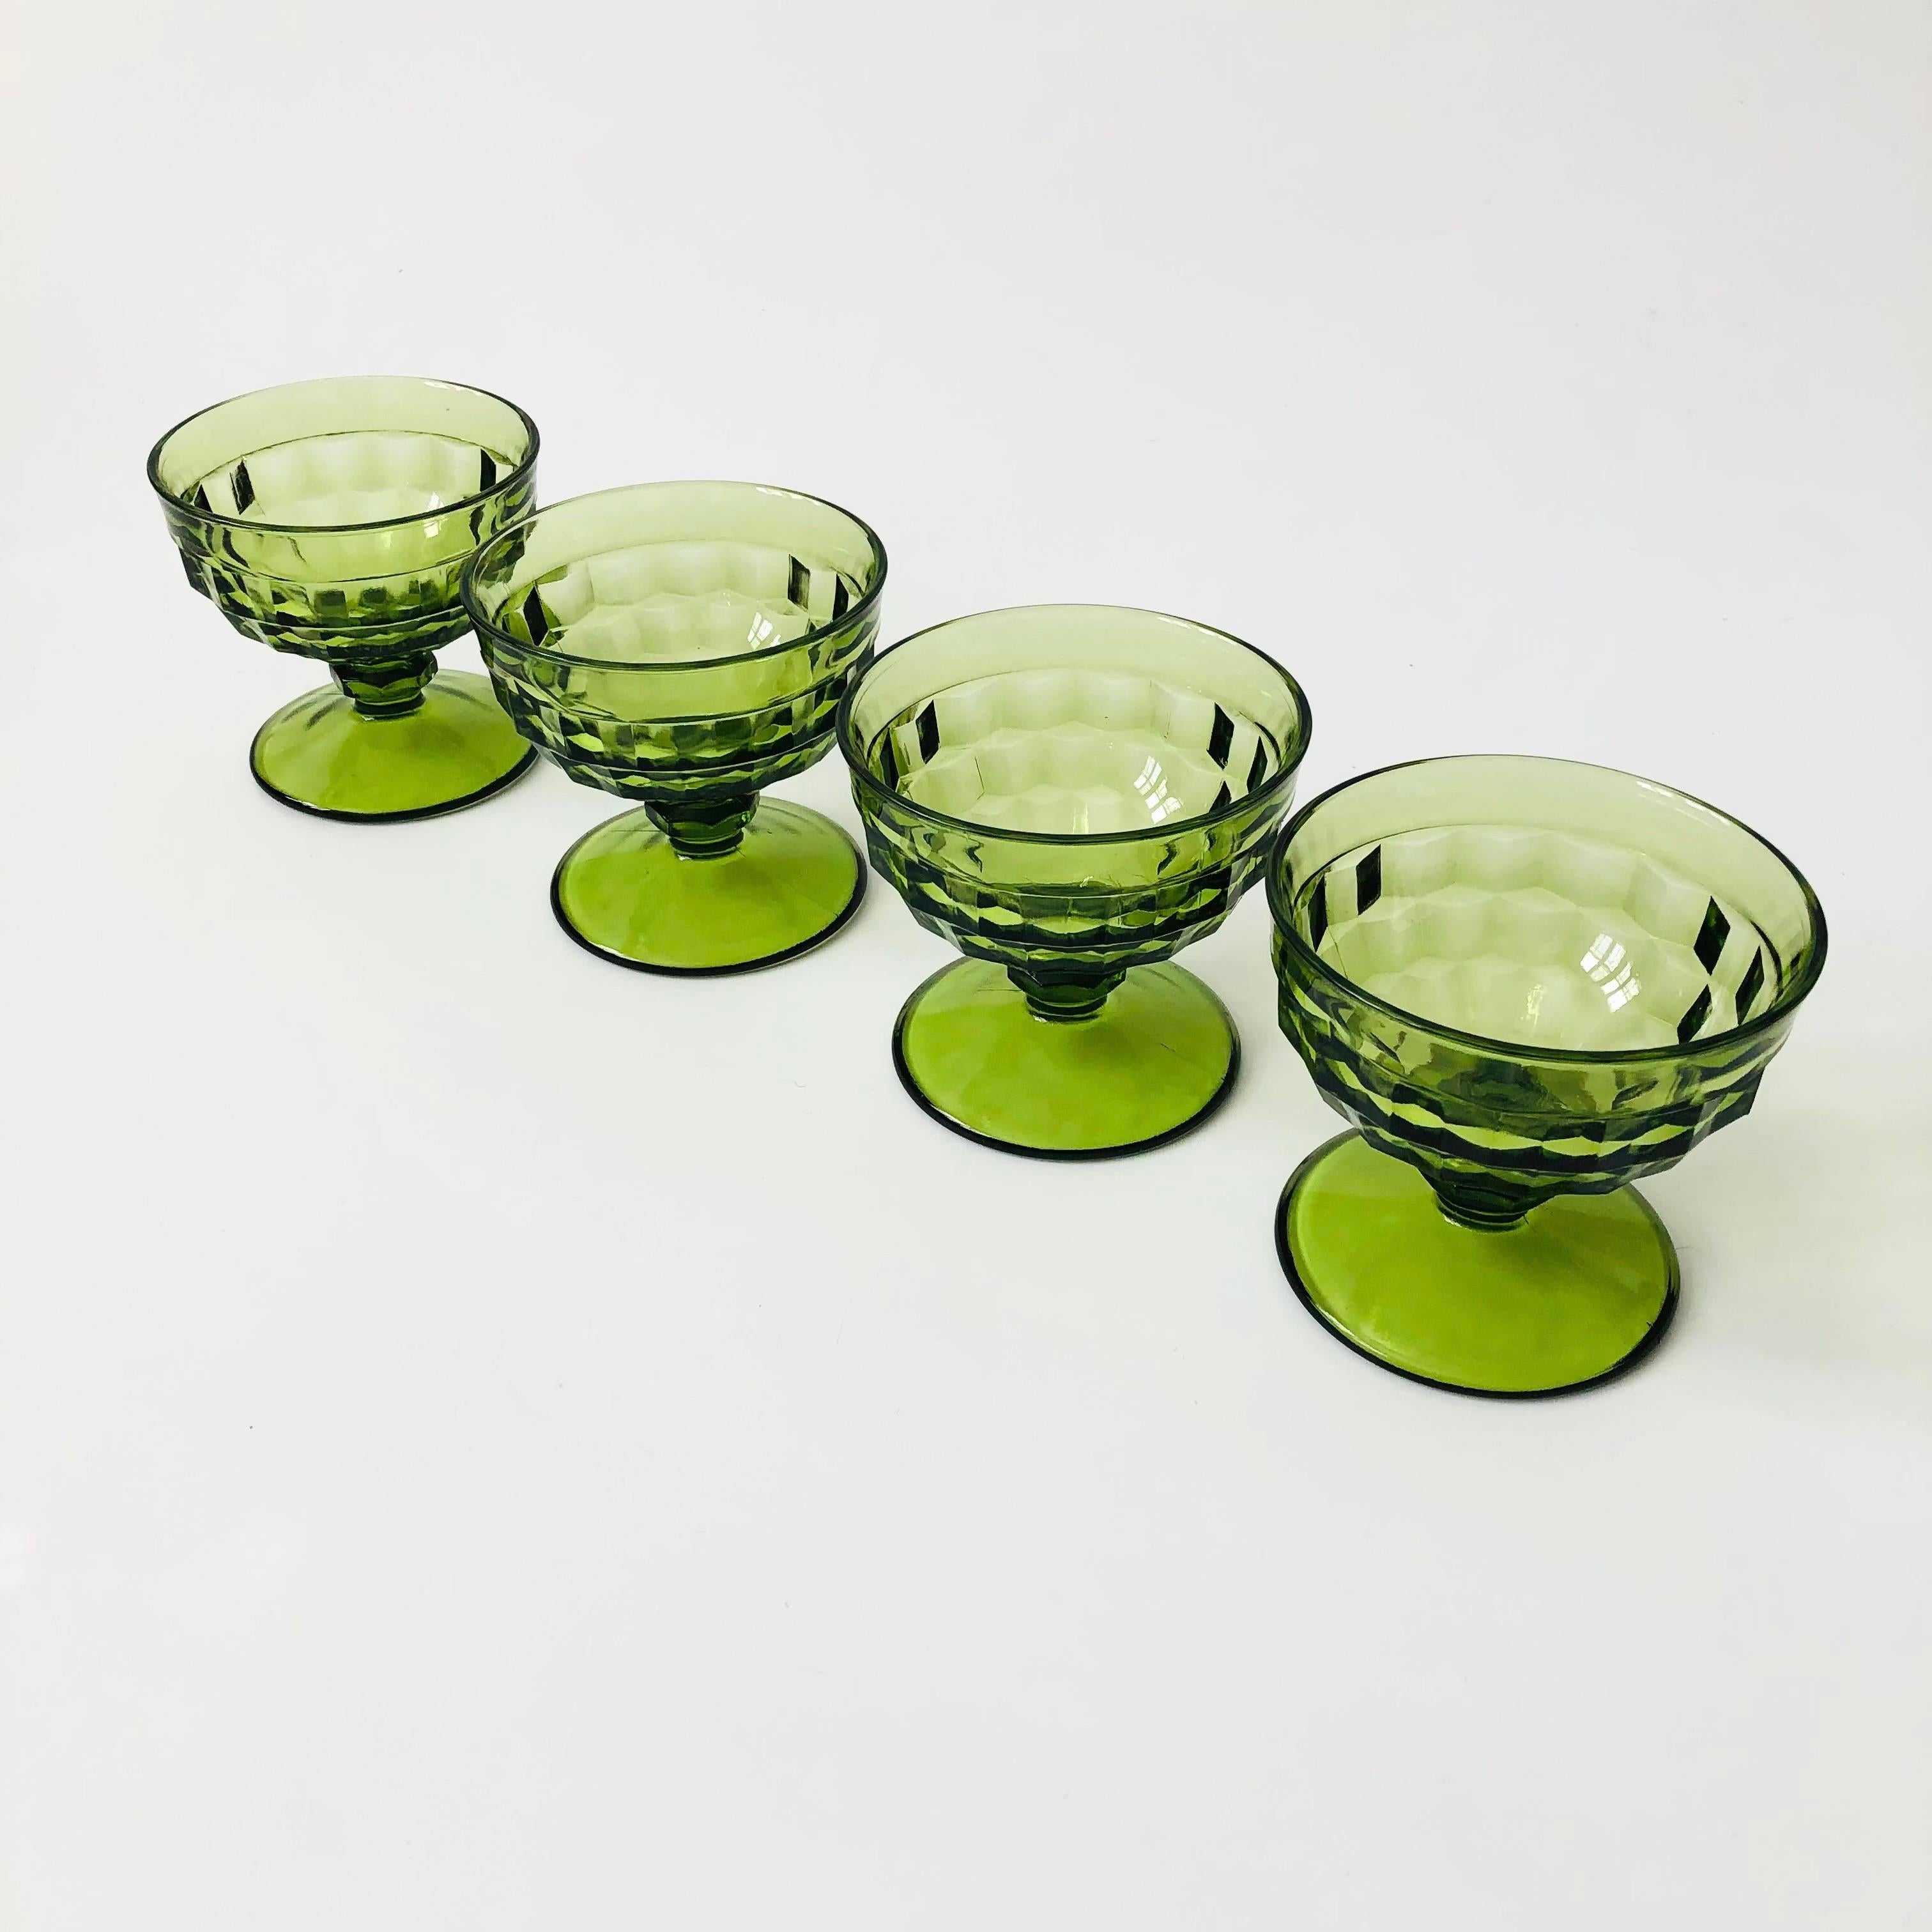 A set of 4 vintage coupe glasses with a cubist design in green glass. Made in the Whitehall pattern by Indiana Glass. Perfect for wine or champagne. Smooth interiors.

